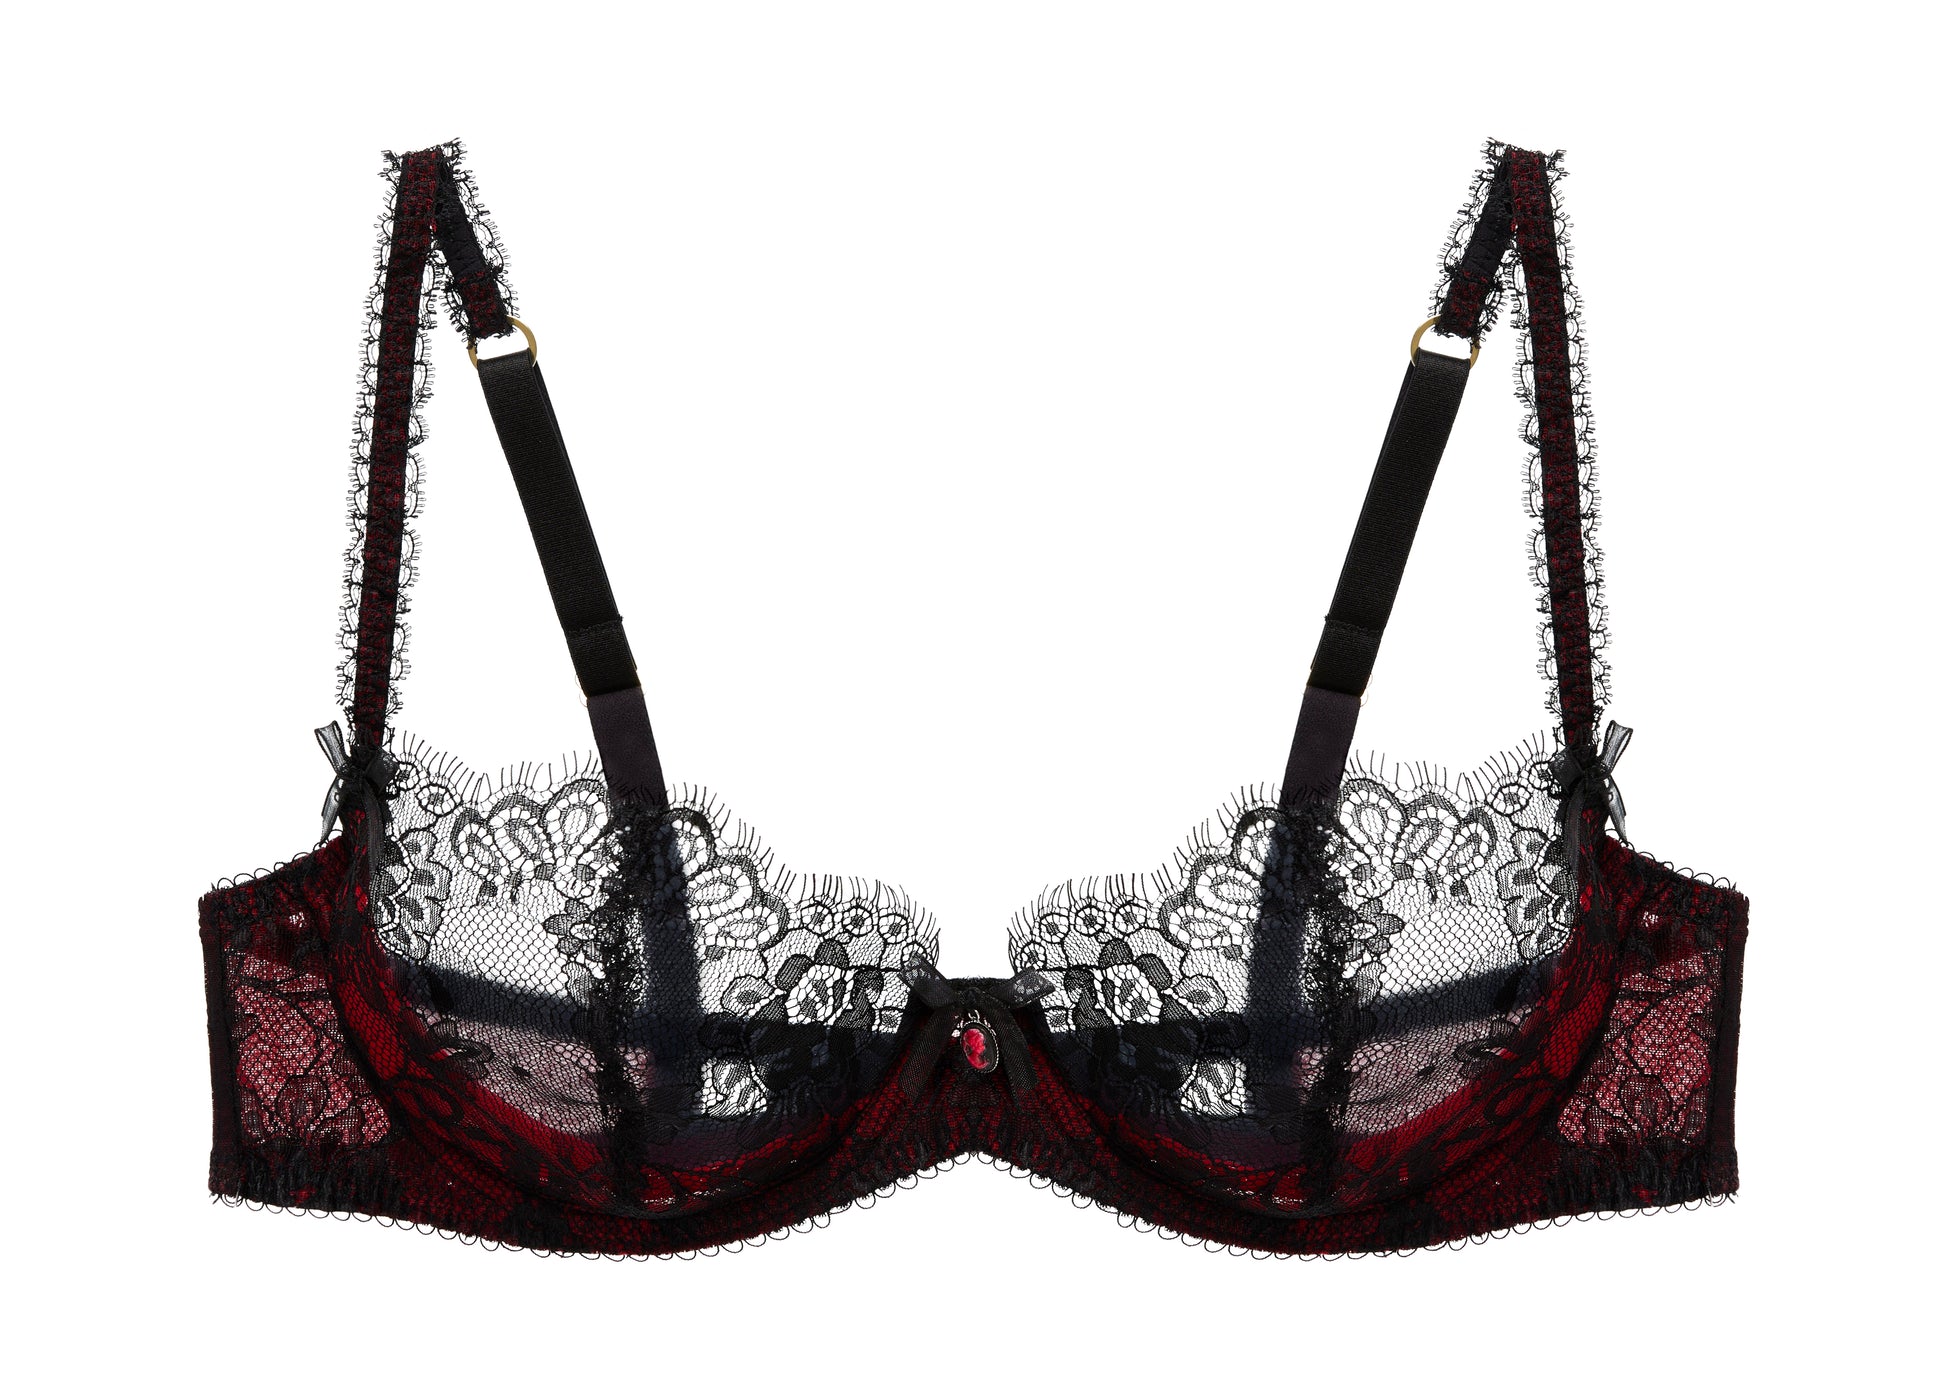 Savoir Faire Sheer Lace Bra - Black/Flame Red- The Rack Shack